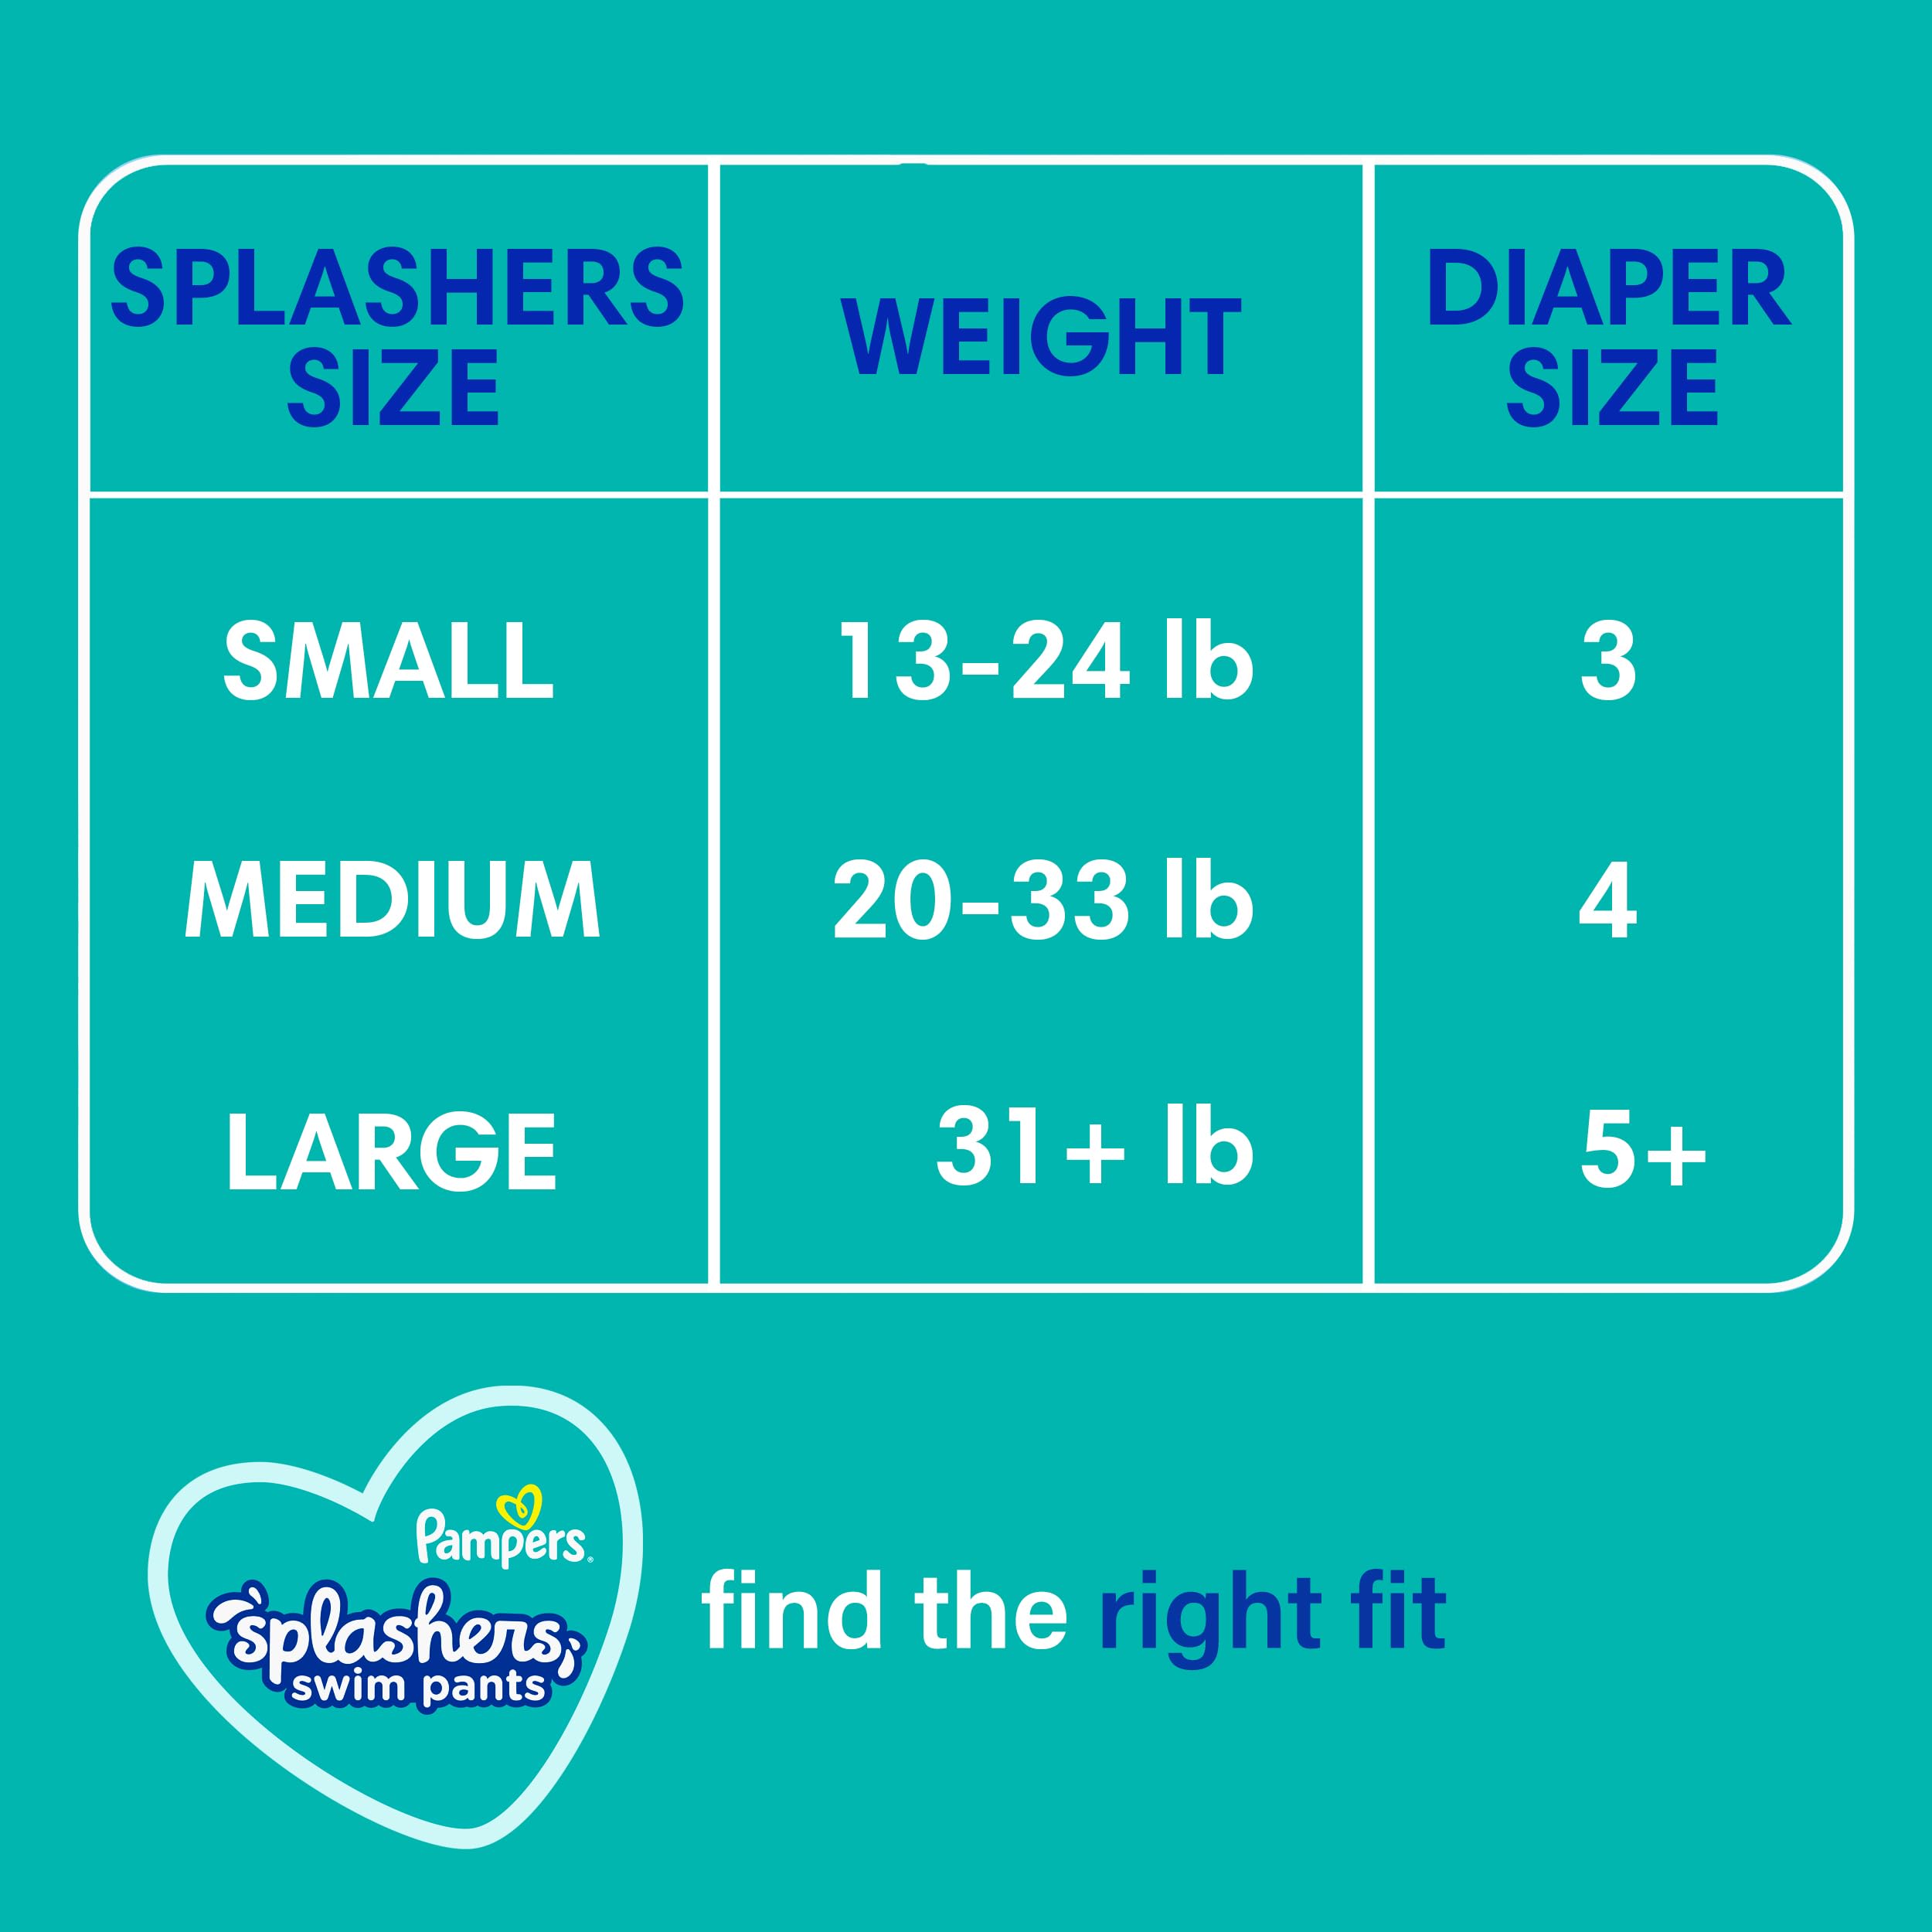 Pampers Splashers Disposable Swim Diapers Size 4 (20-33lbs), 18 count